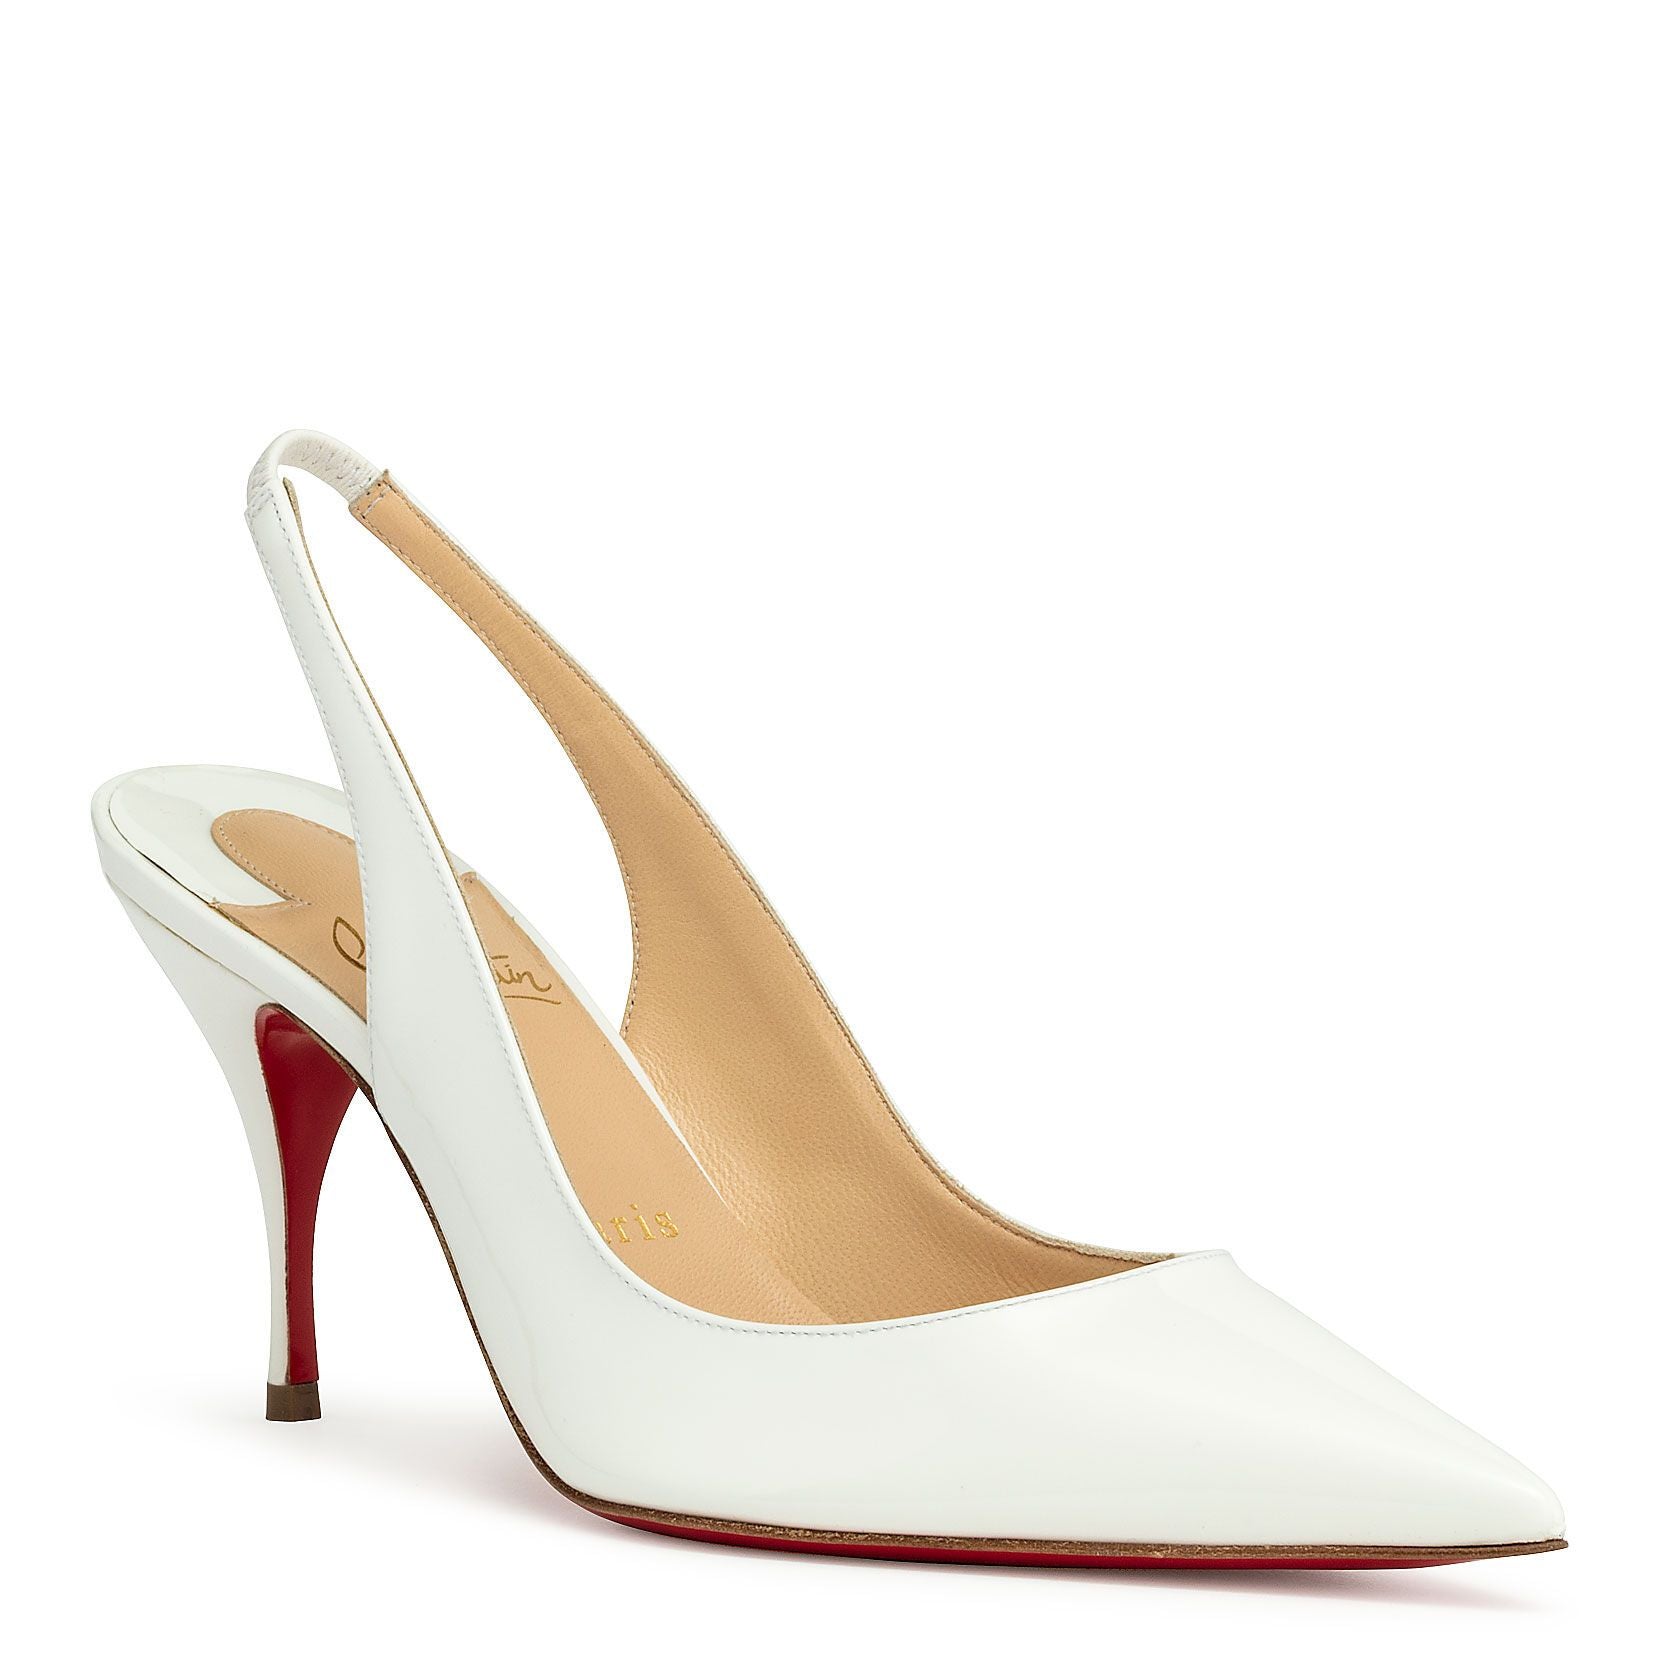 Clare sling 80 patent white pumps